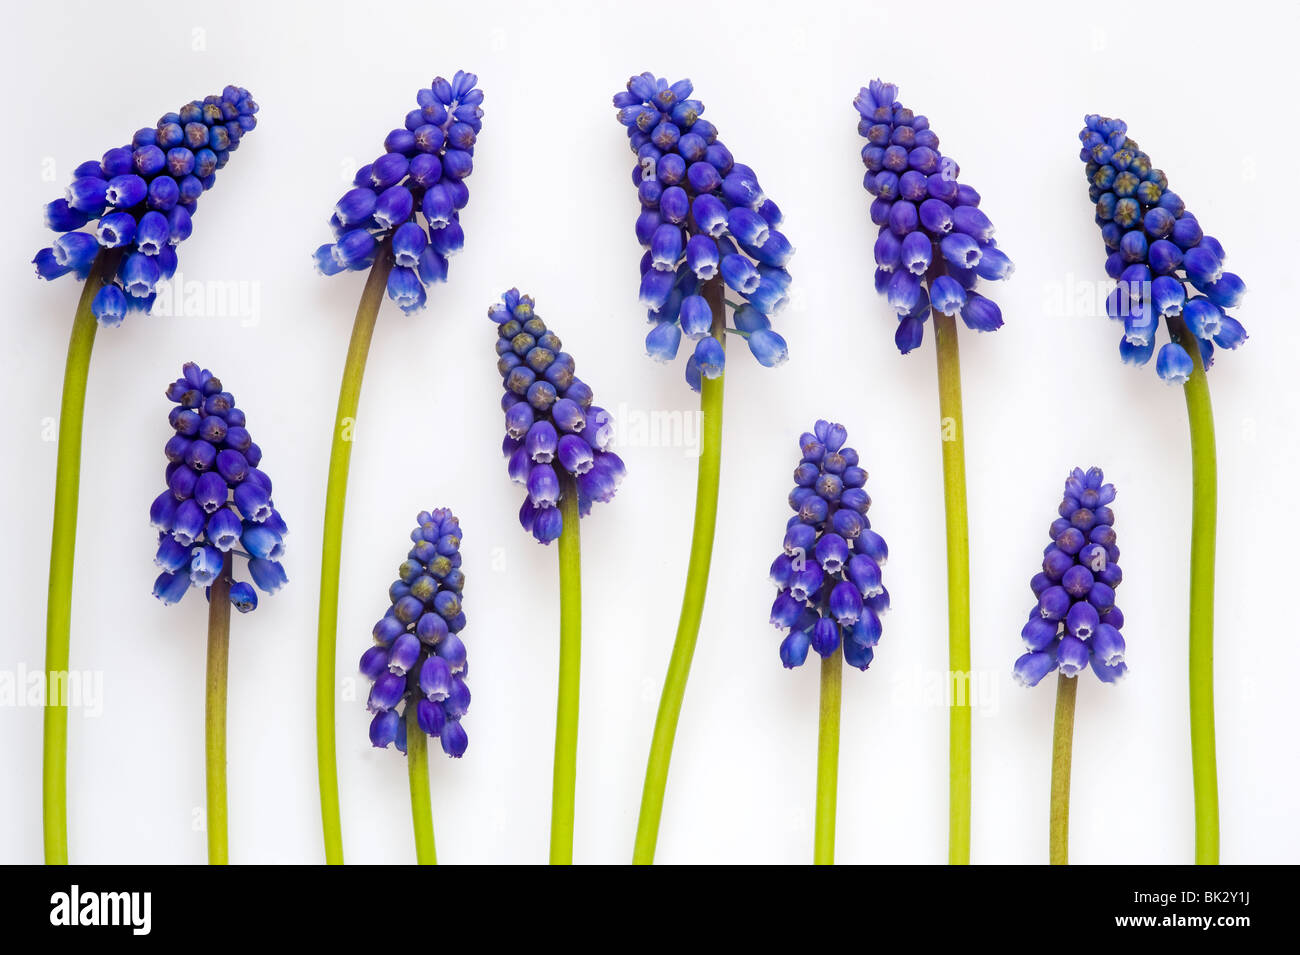 grape hyacinth or muscari arranged on a white background Stock Photo